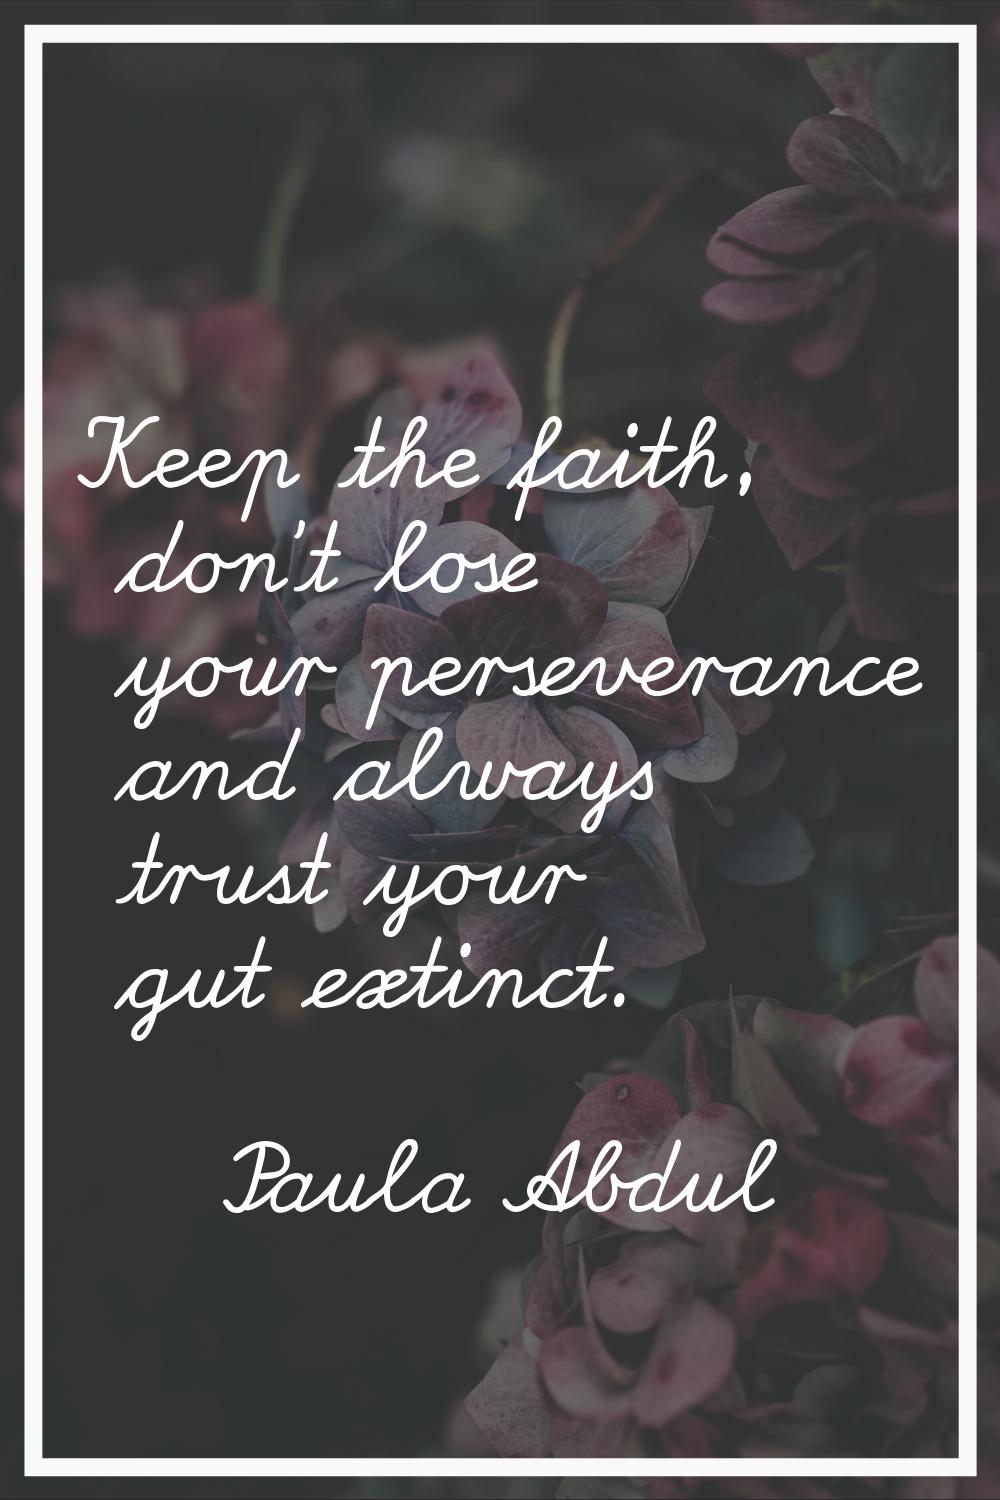 Keep the faith, don't lose your perseverance and always trust your gut extinct.